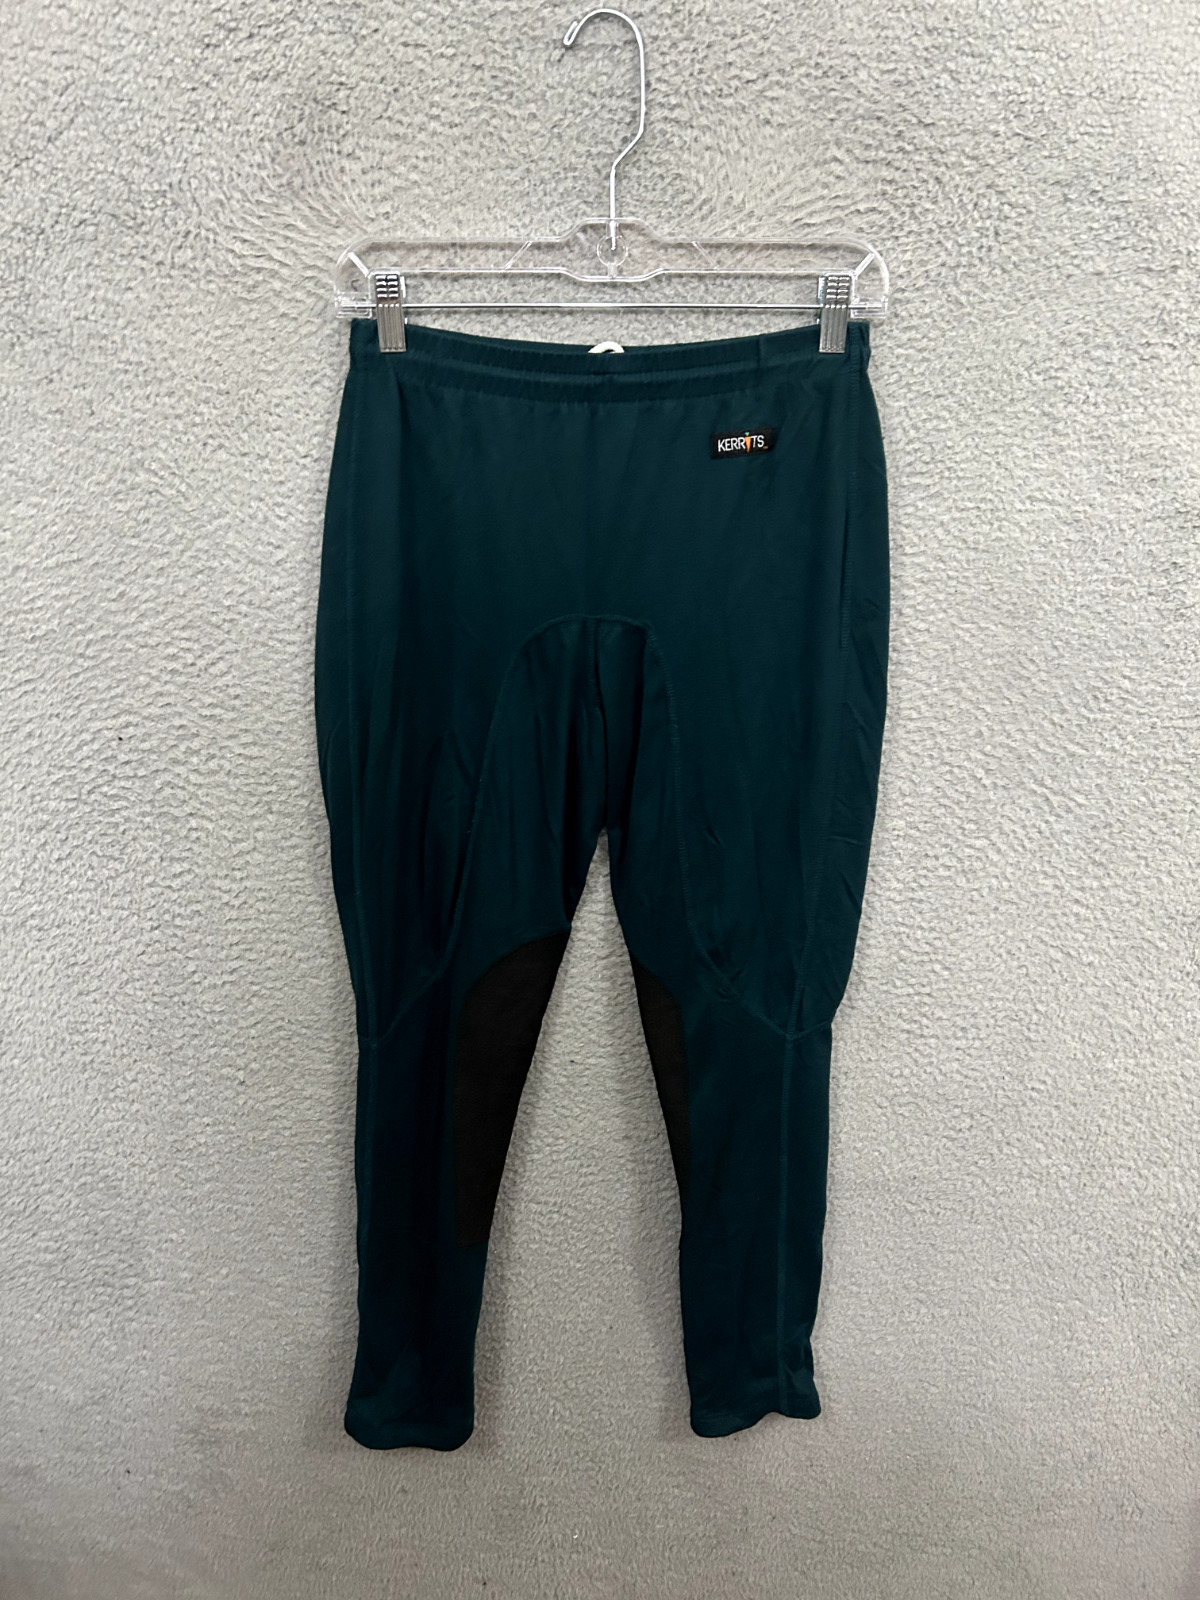 VTG Kerrits Pants Womens Large Green Equestrian Horse Riding Breeches Knee Patch